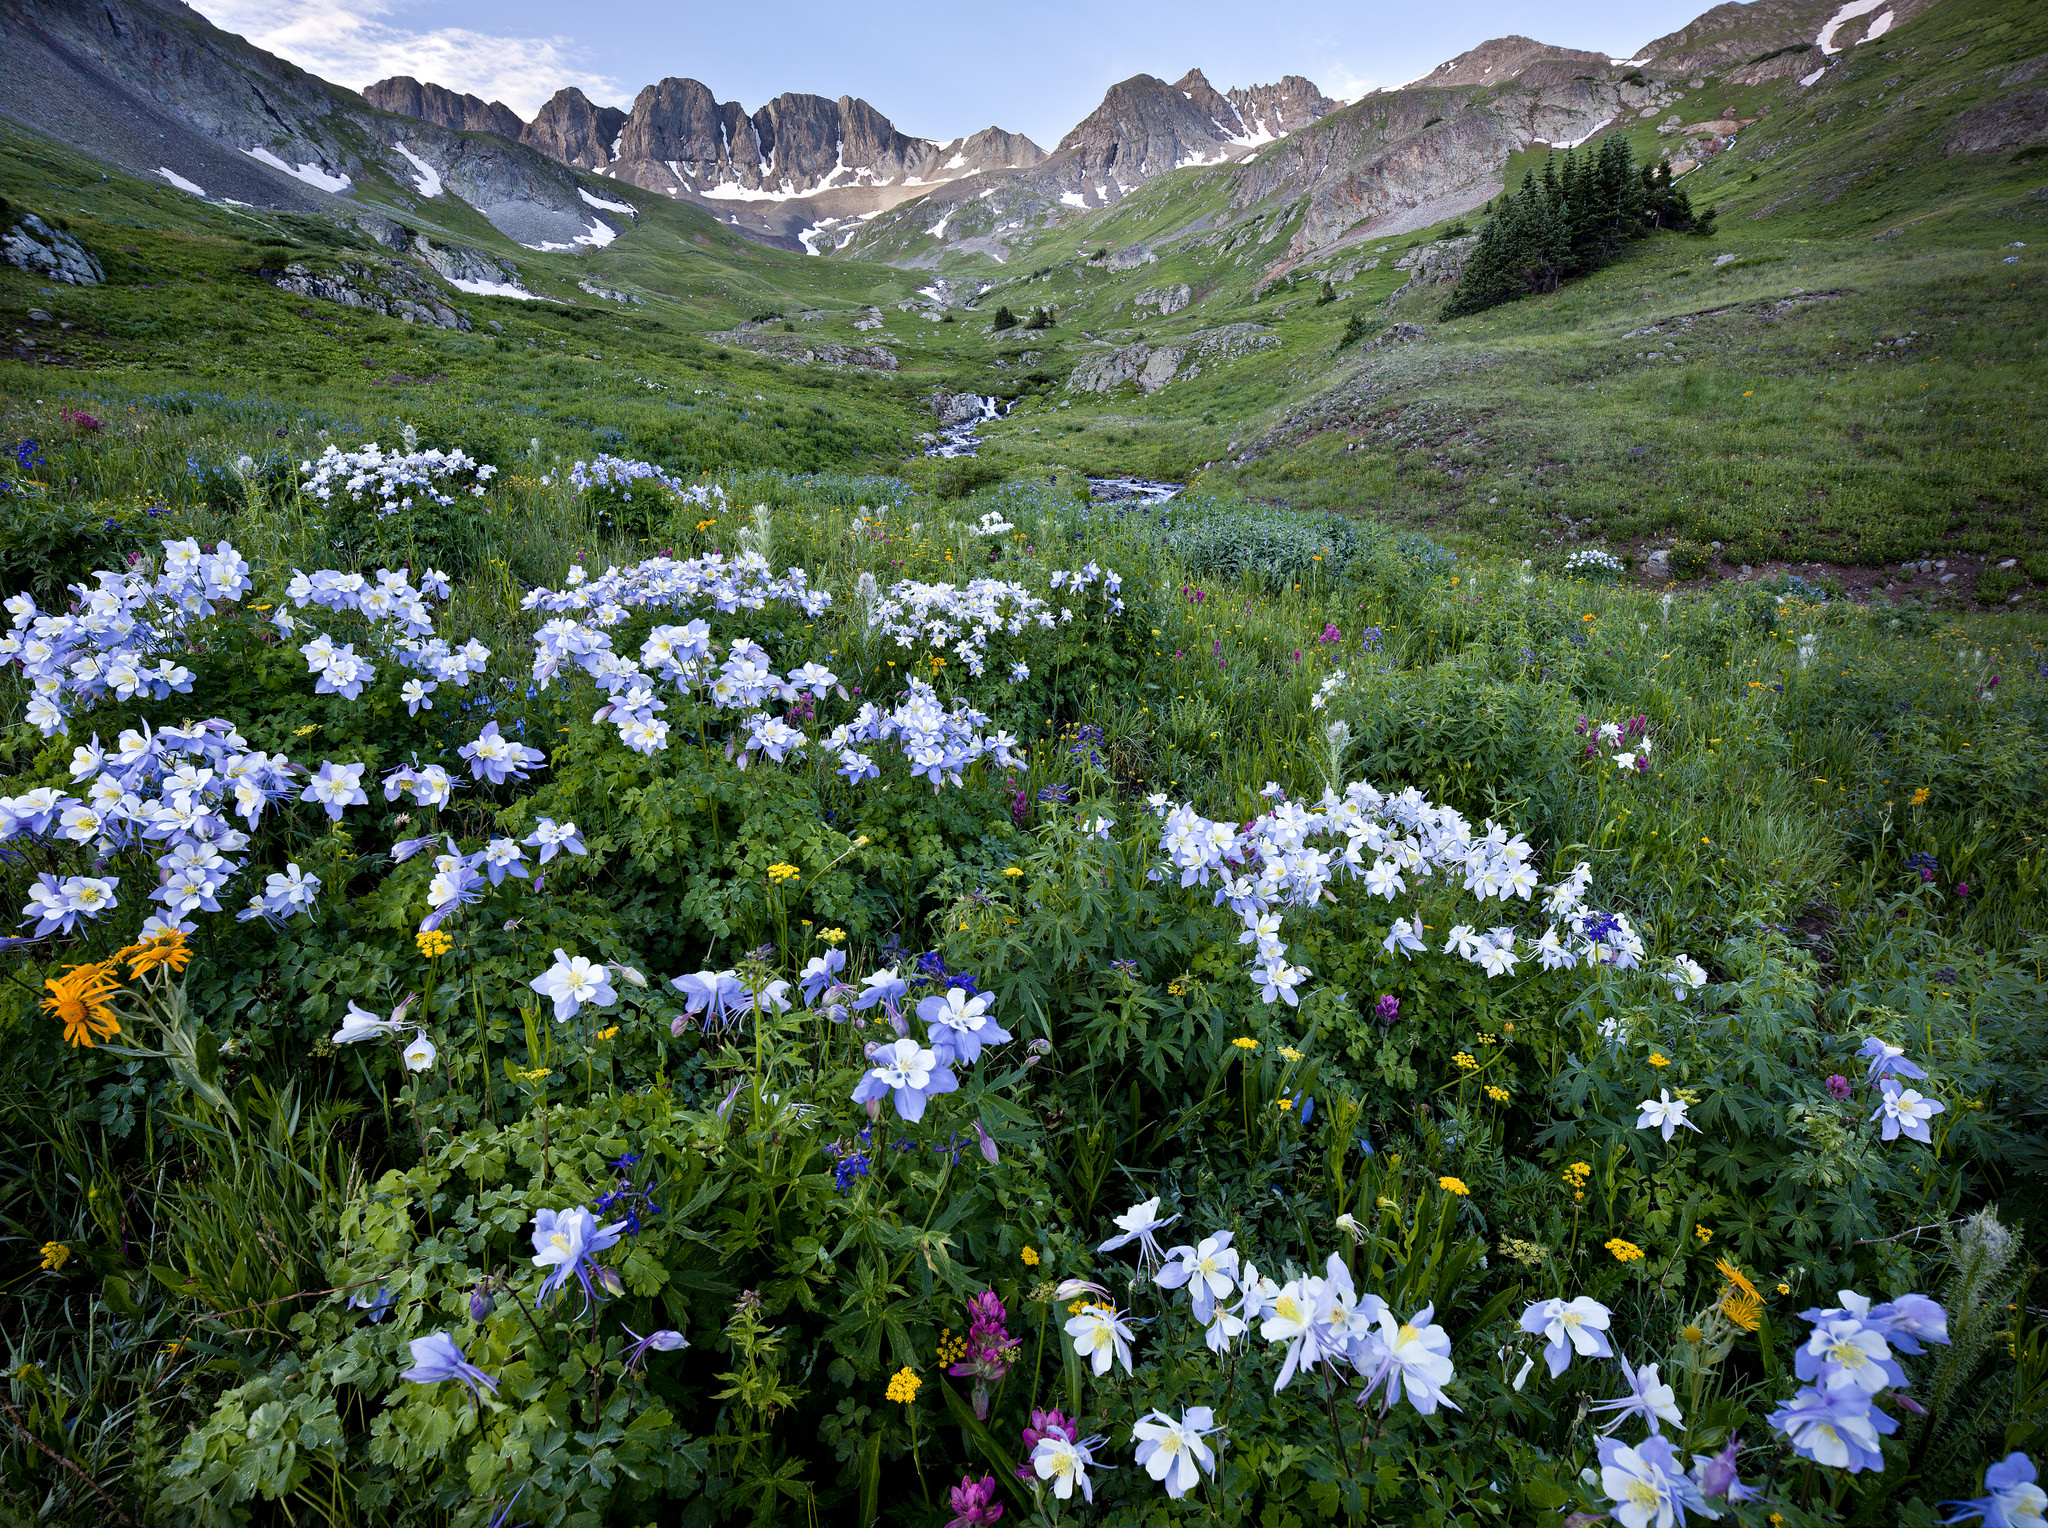 Beautiful flowers such as the Columbine can be found in abundance in the alpine meadows of Colorado's Rocky Mountains ... photo by CC user mypubliclands on Flickr